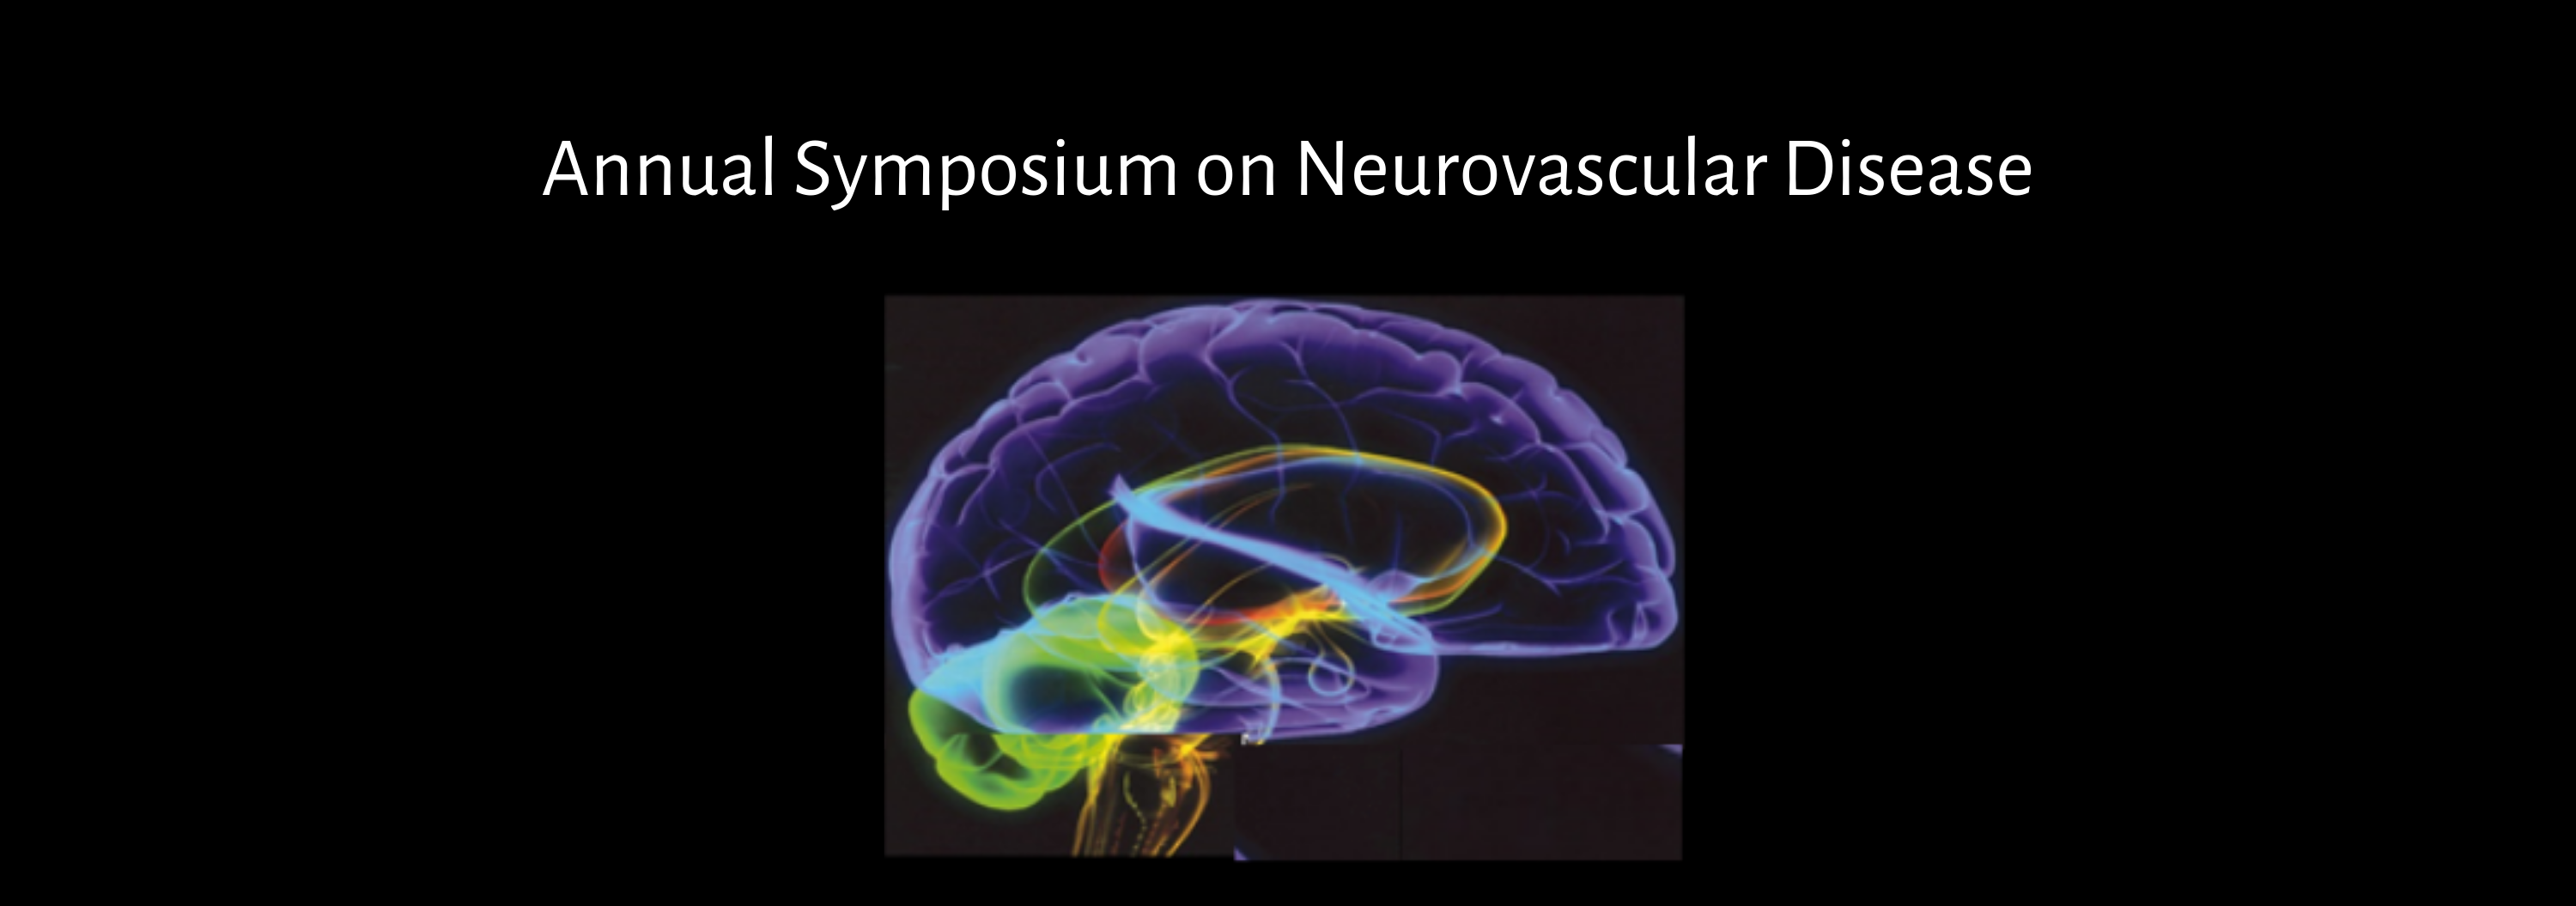 12th Annual Symposium on Neurovascular Disease: Technology and Trials Update Banner